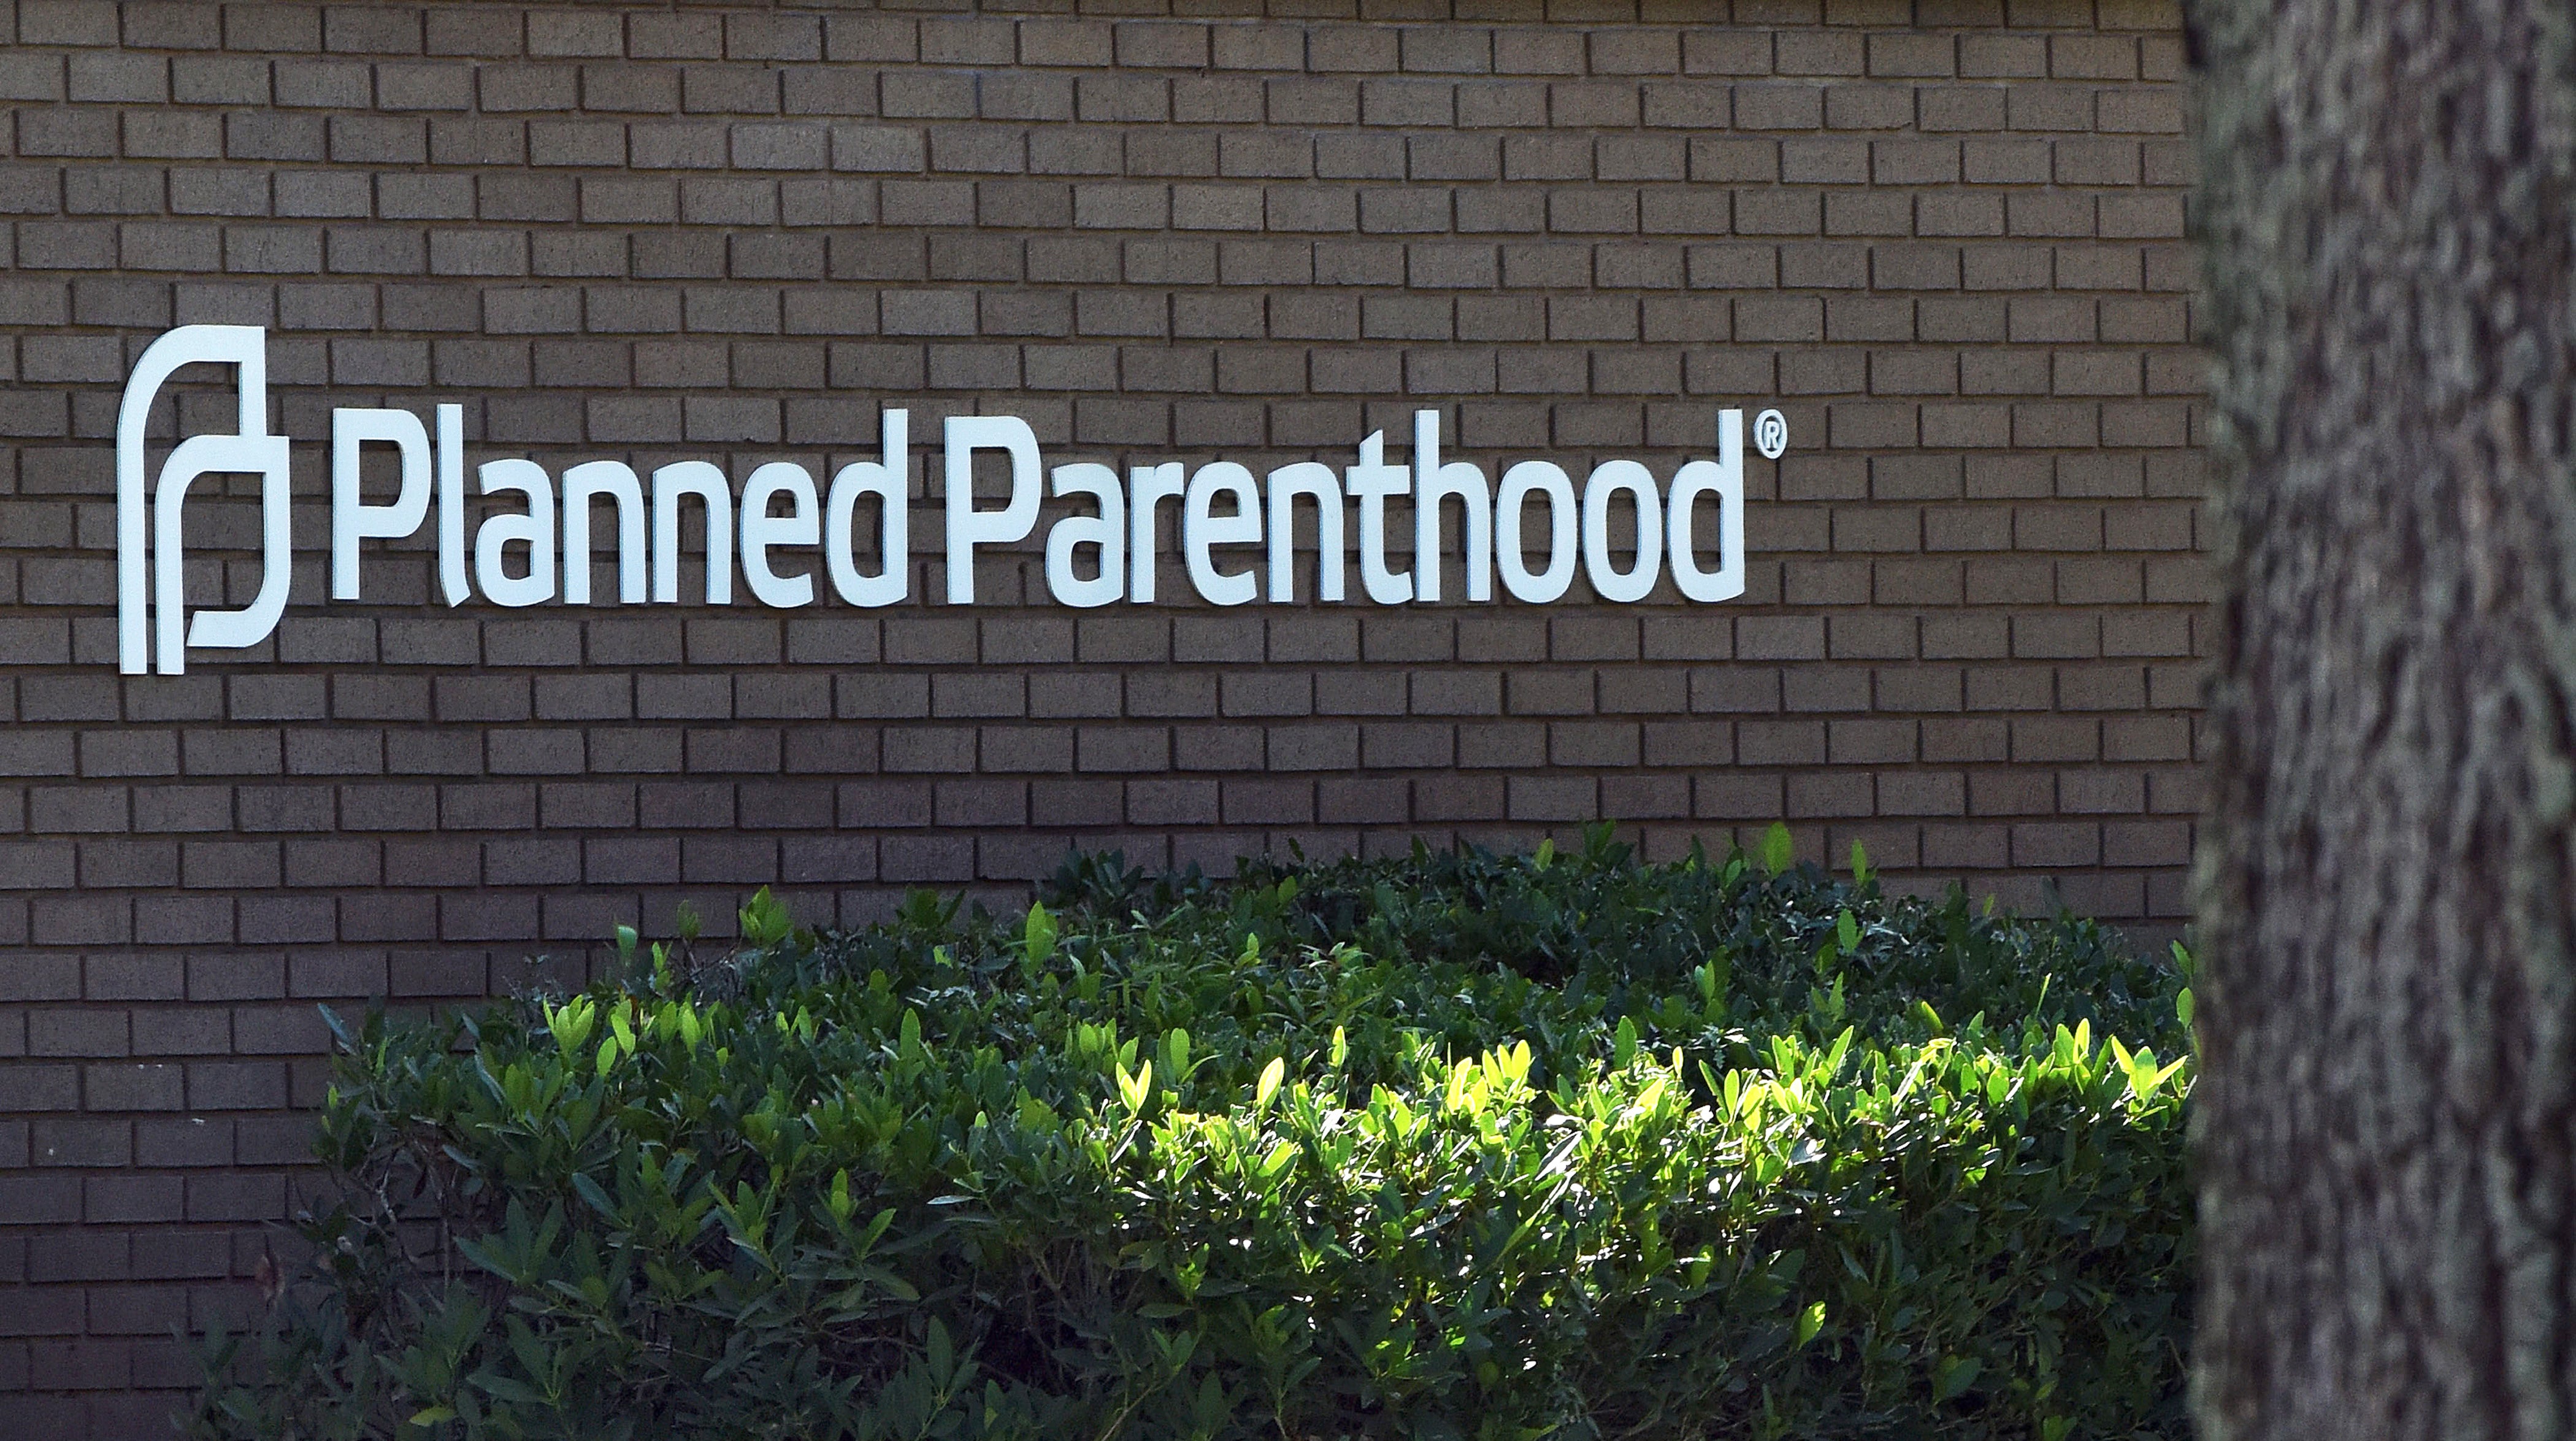 Planned Parenthood Leaves Federal Family Planning Program Over Abortion Restrictions